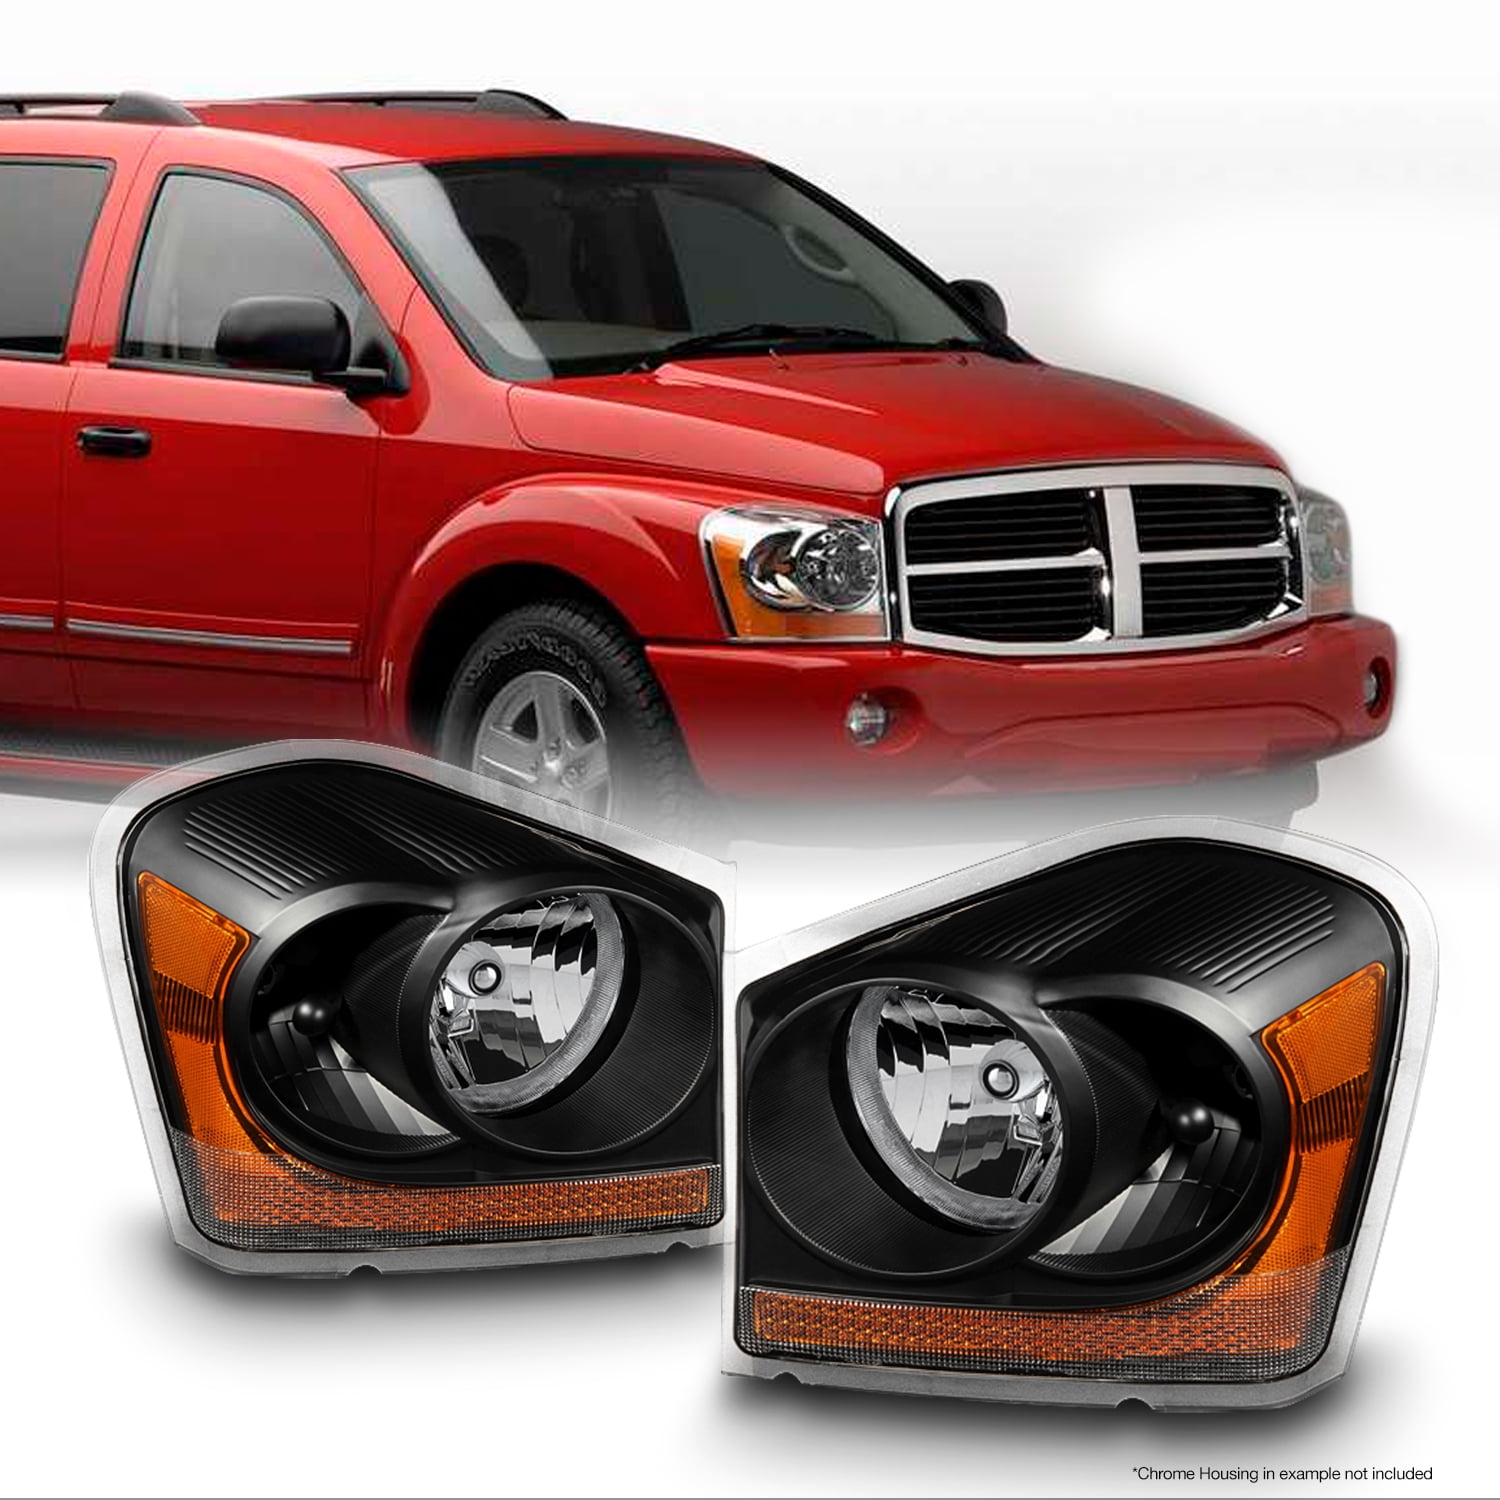 2004-2005 DODGE DURANGO CRYSTAL REPLACEMENT HEADLIGHTS CHROME W/DRL LED+HID KIT